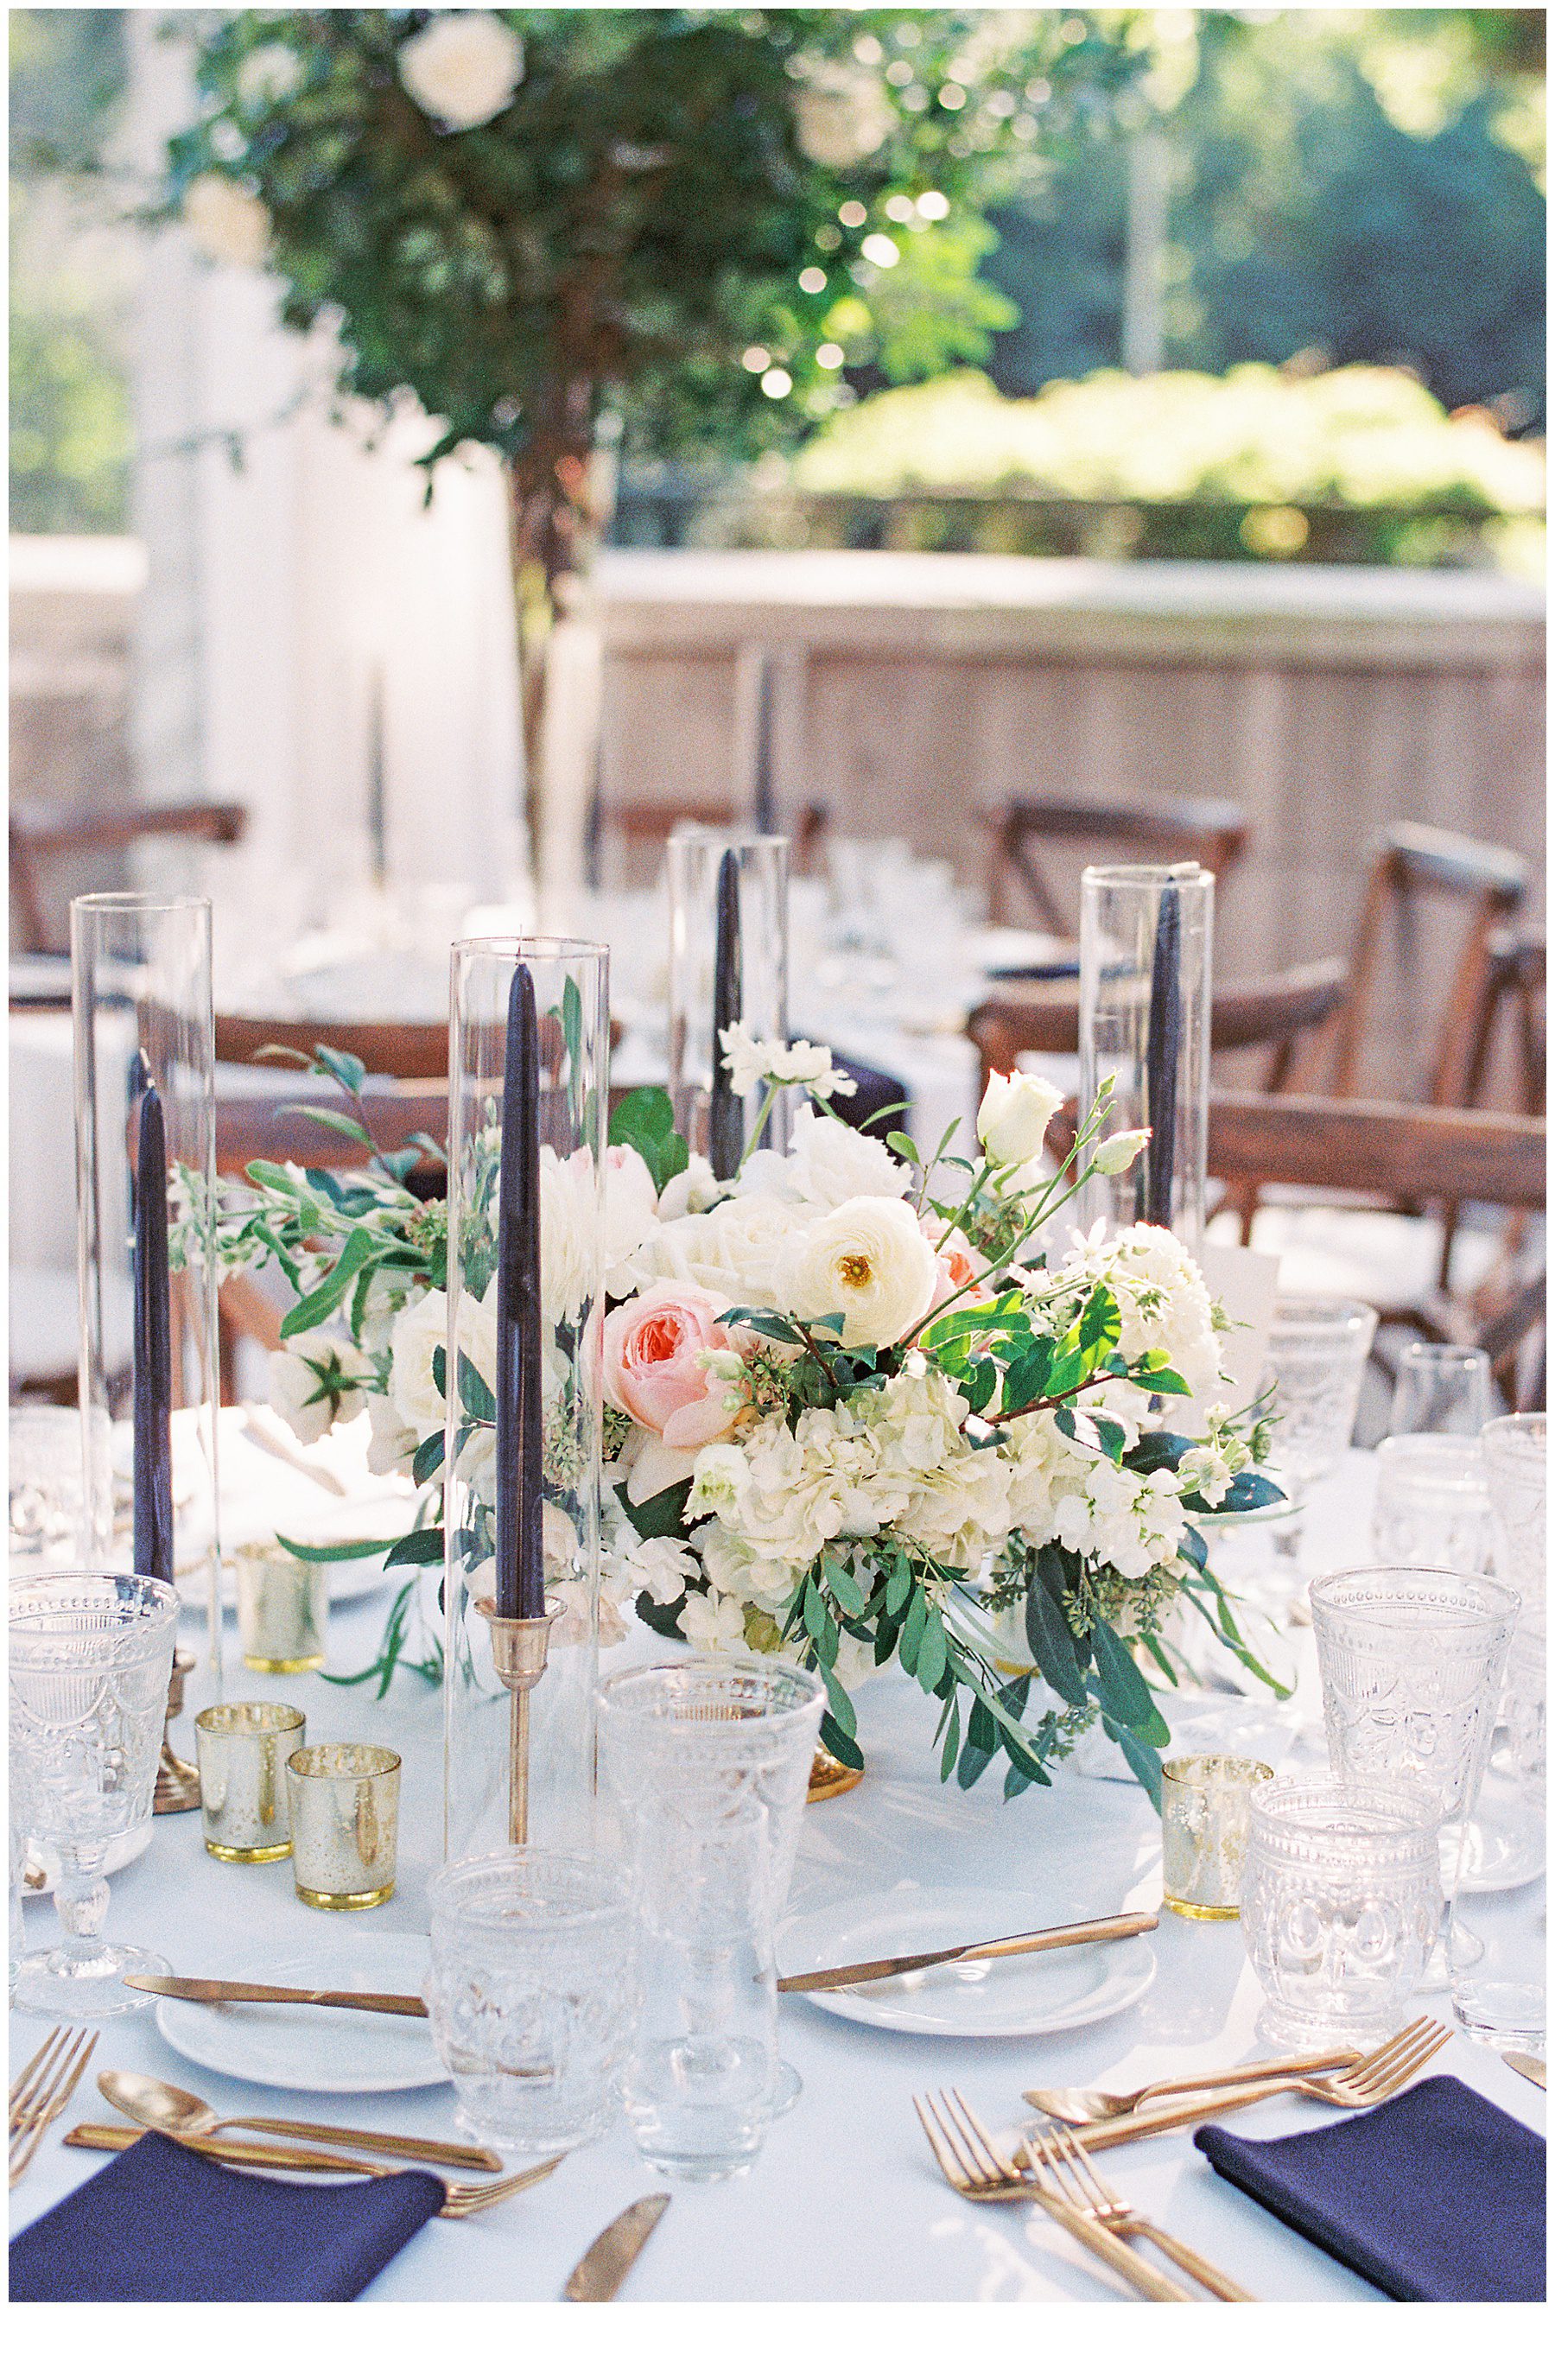 table centerpieces from Early Fall Wedding at Curtis Arboretum in Wyncote, Pennsylvania